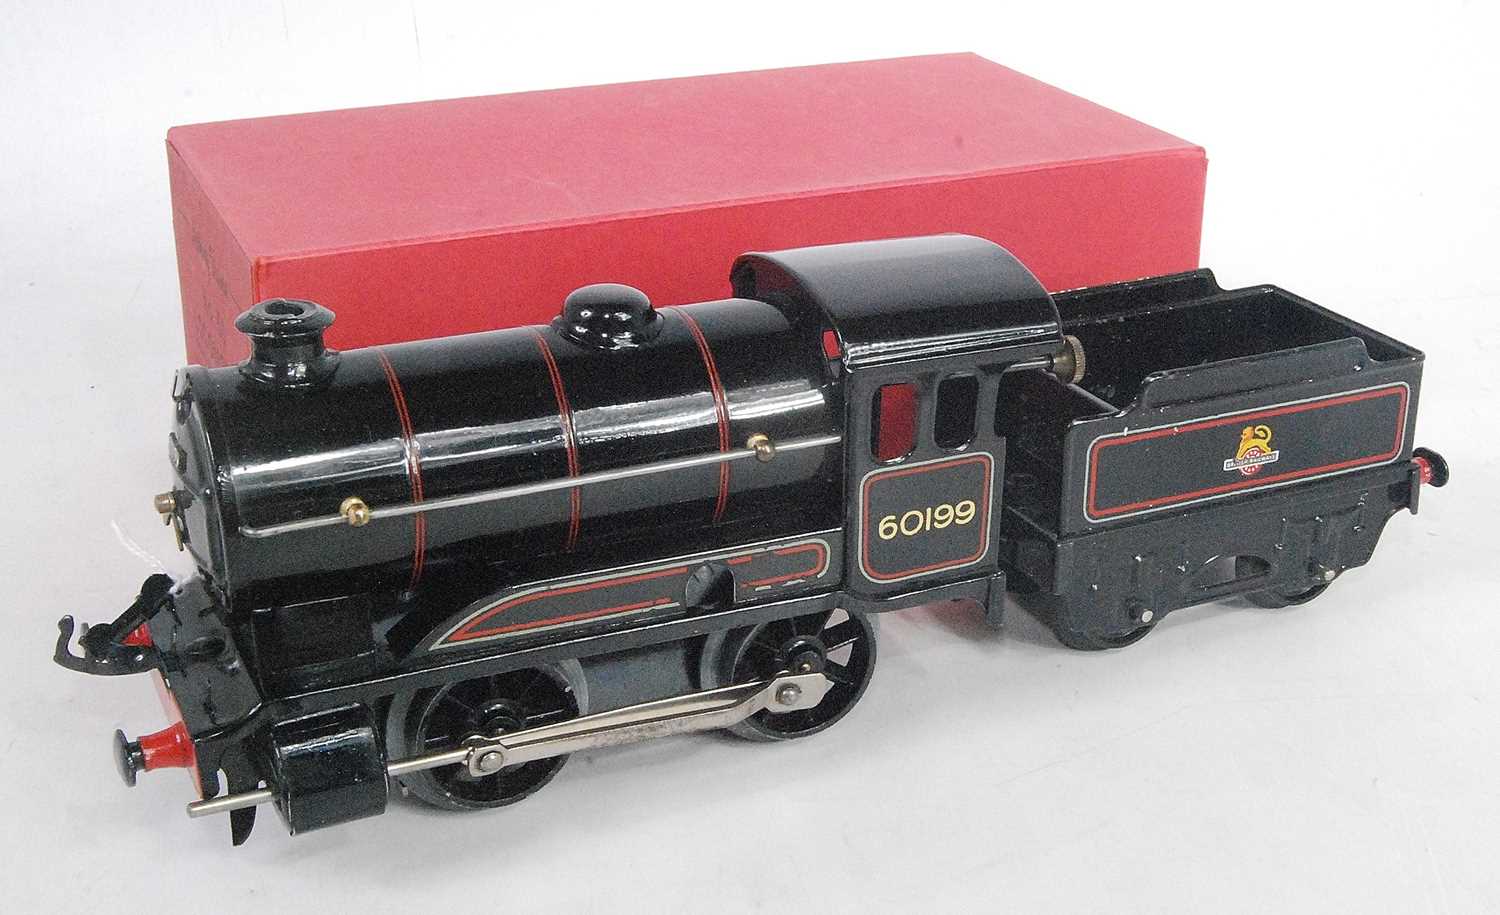 1954-61 Hornby type 50 clockwork loco and tender, 0-4-0 BR lined black 60199, small loss of lining